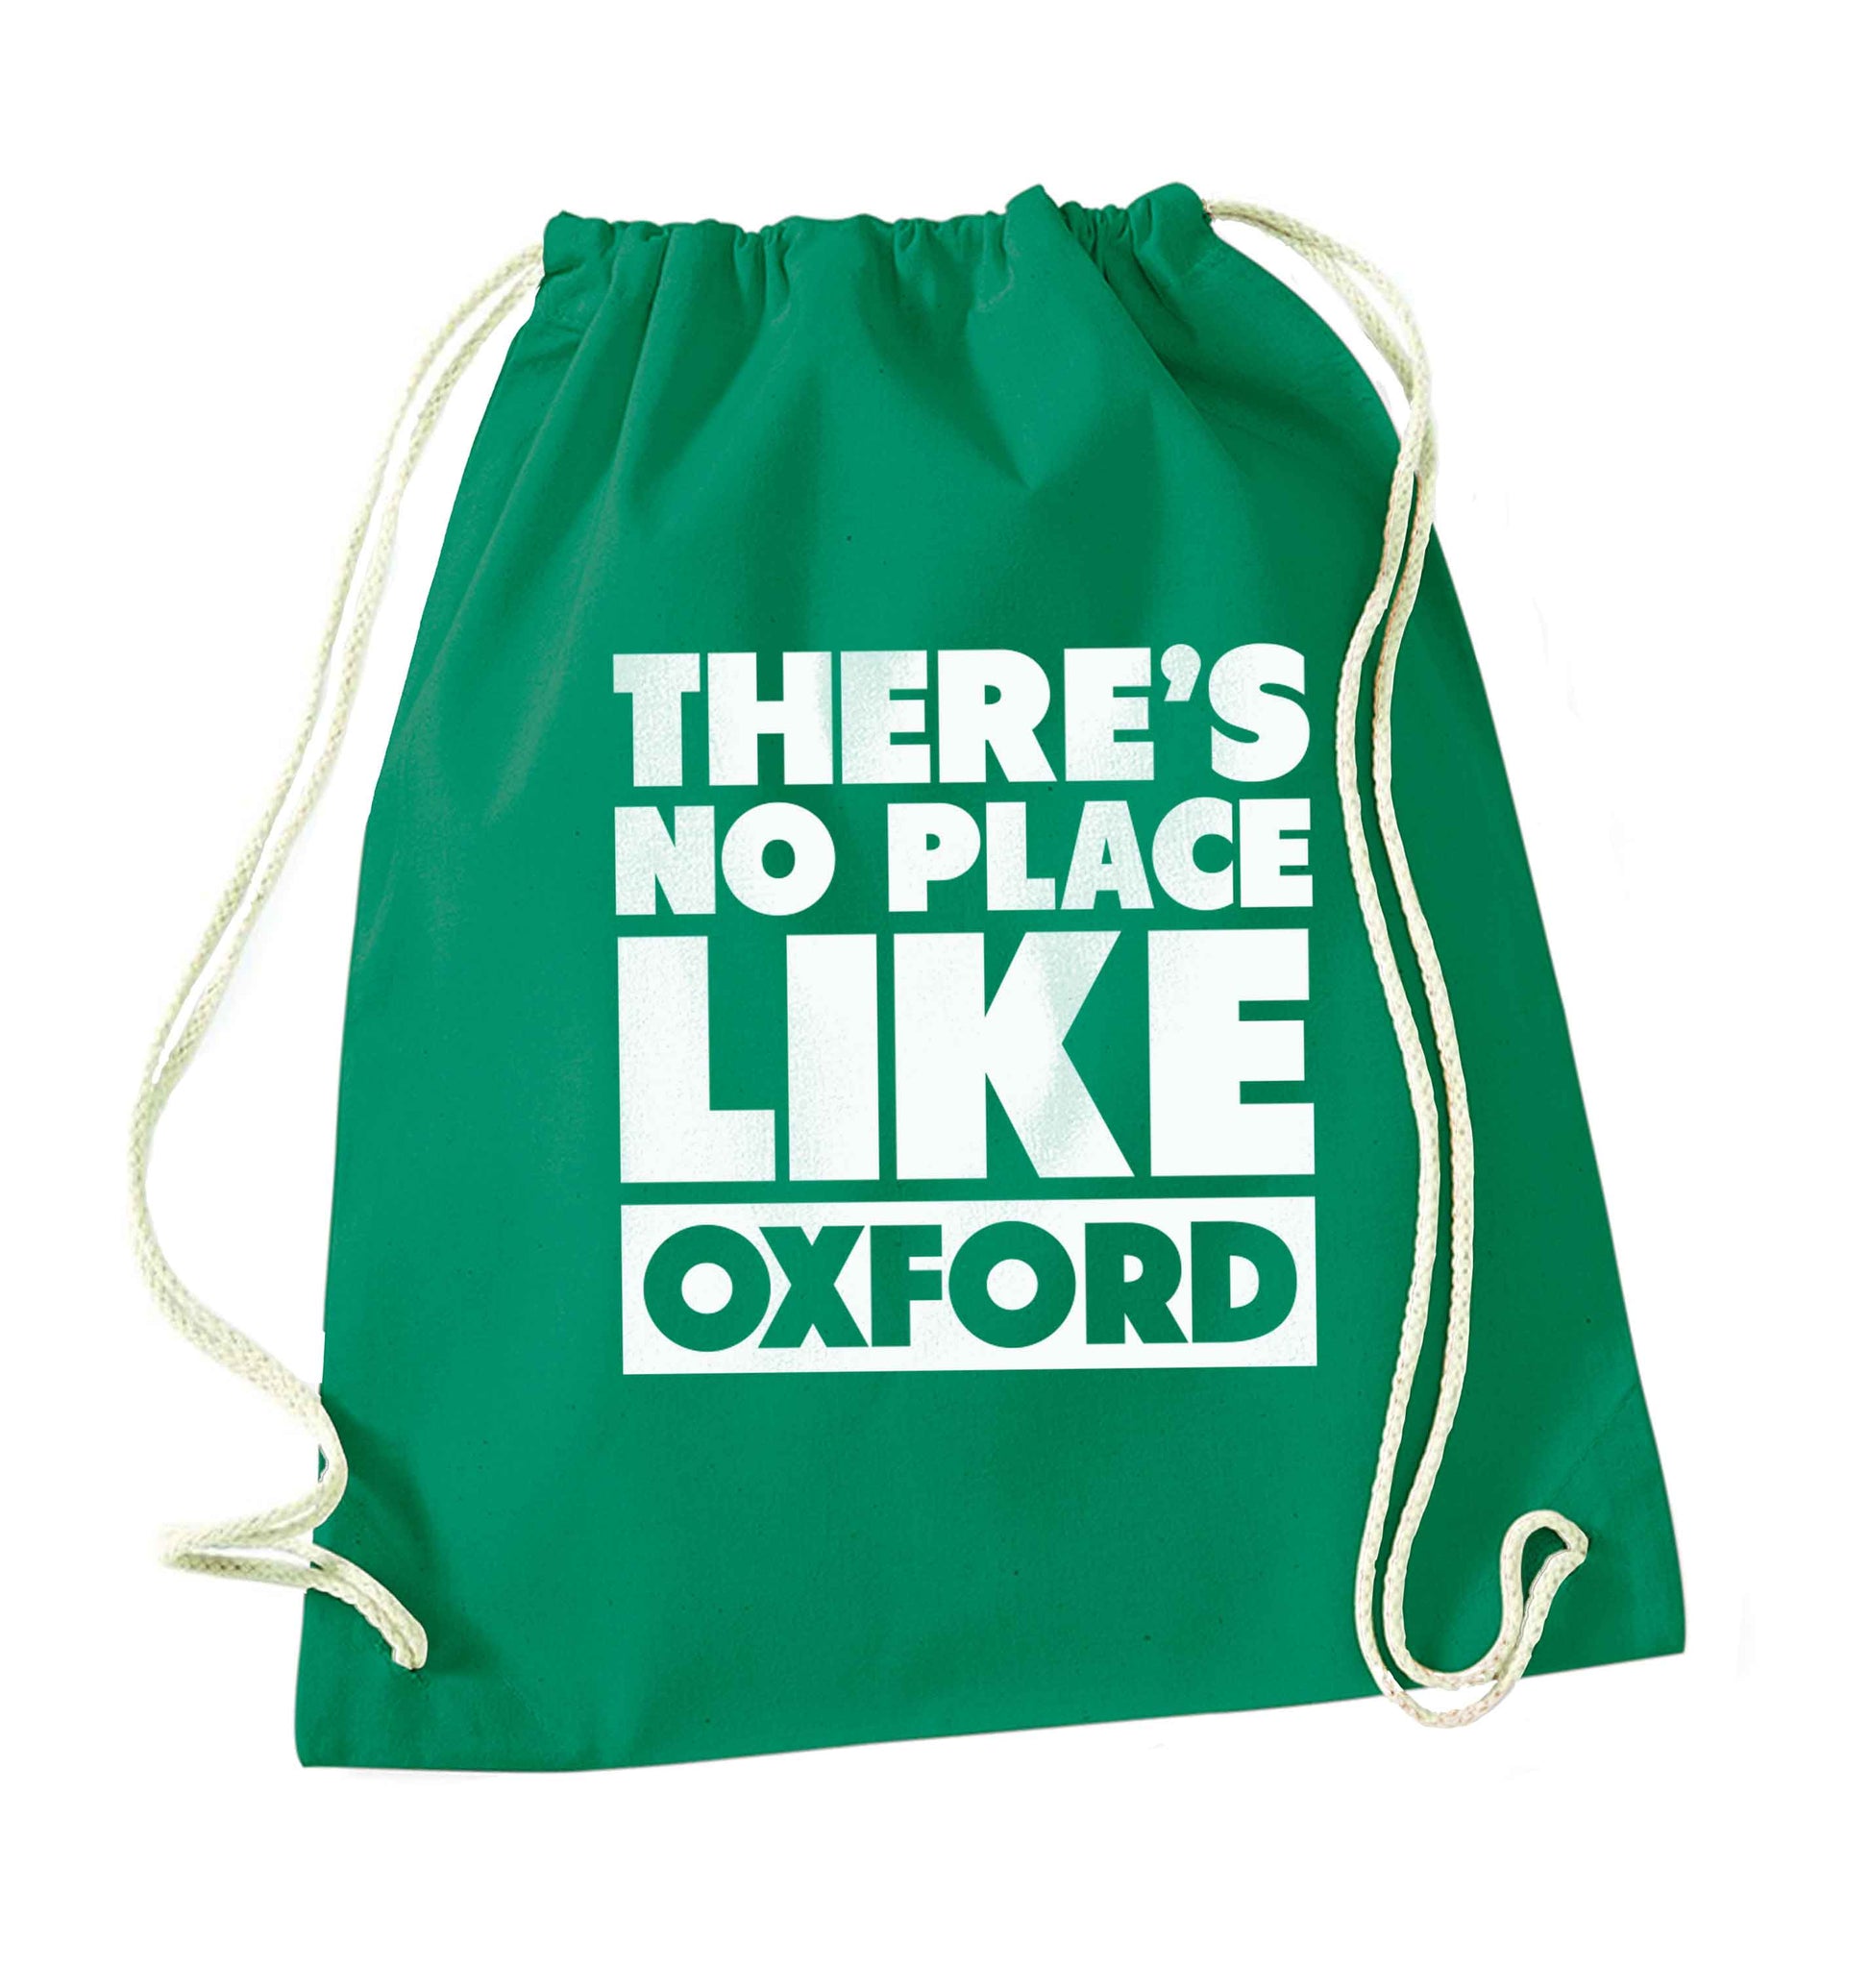 There's no place like Oxford green drawstring bag